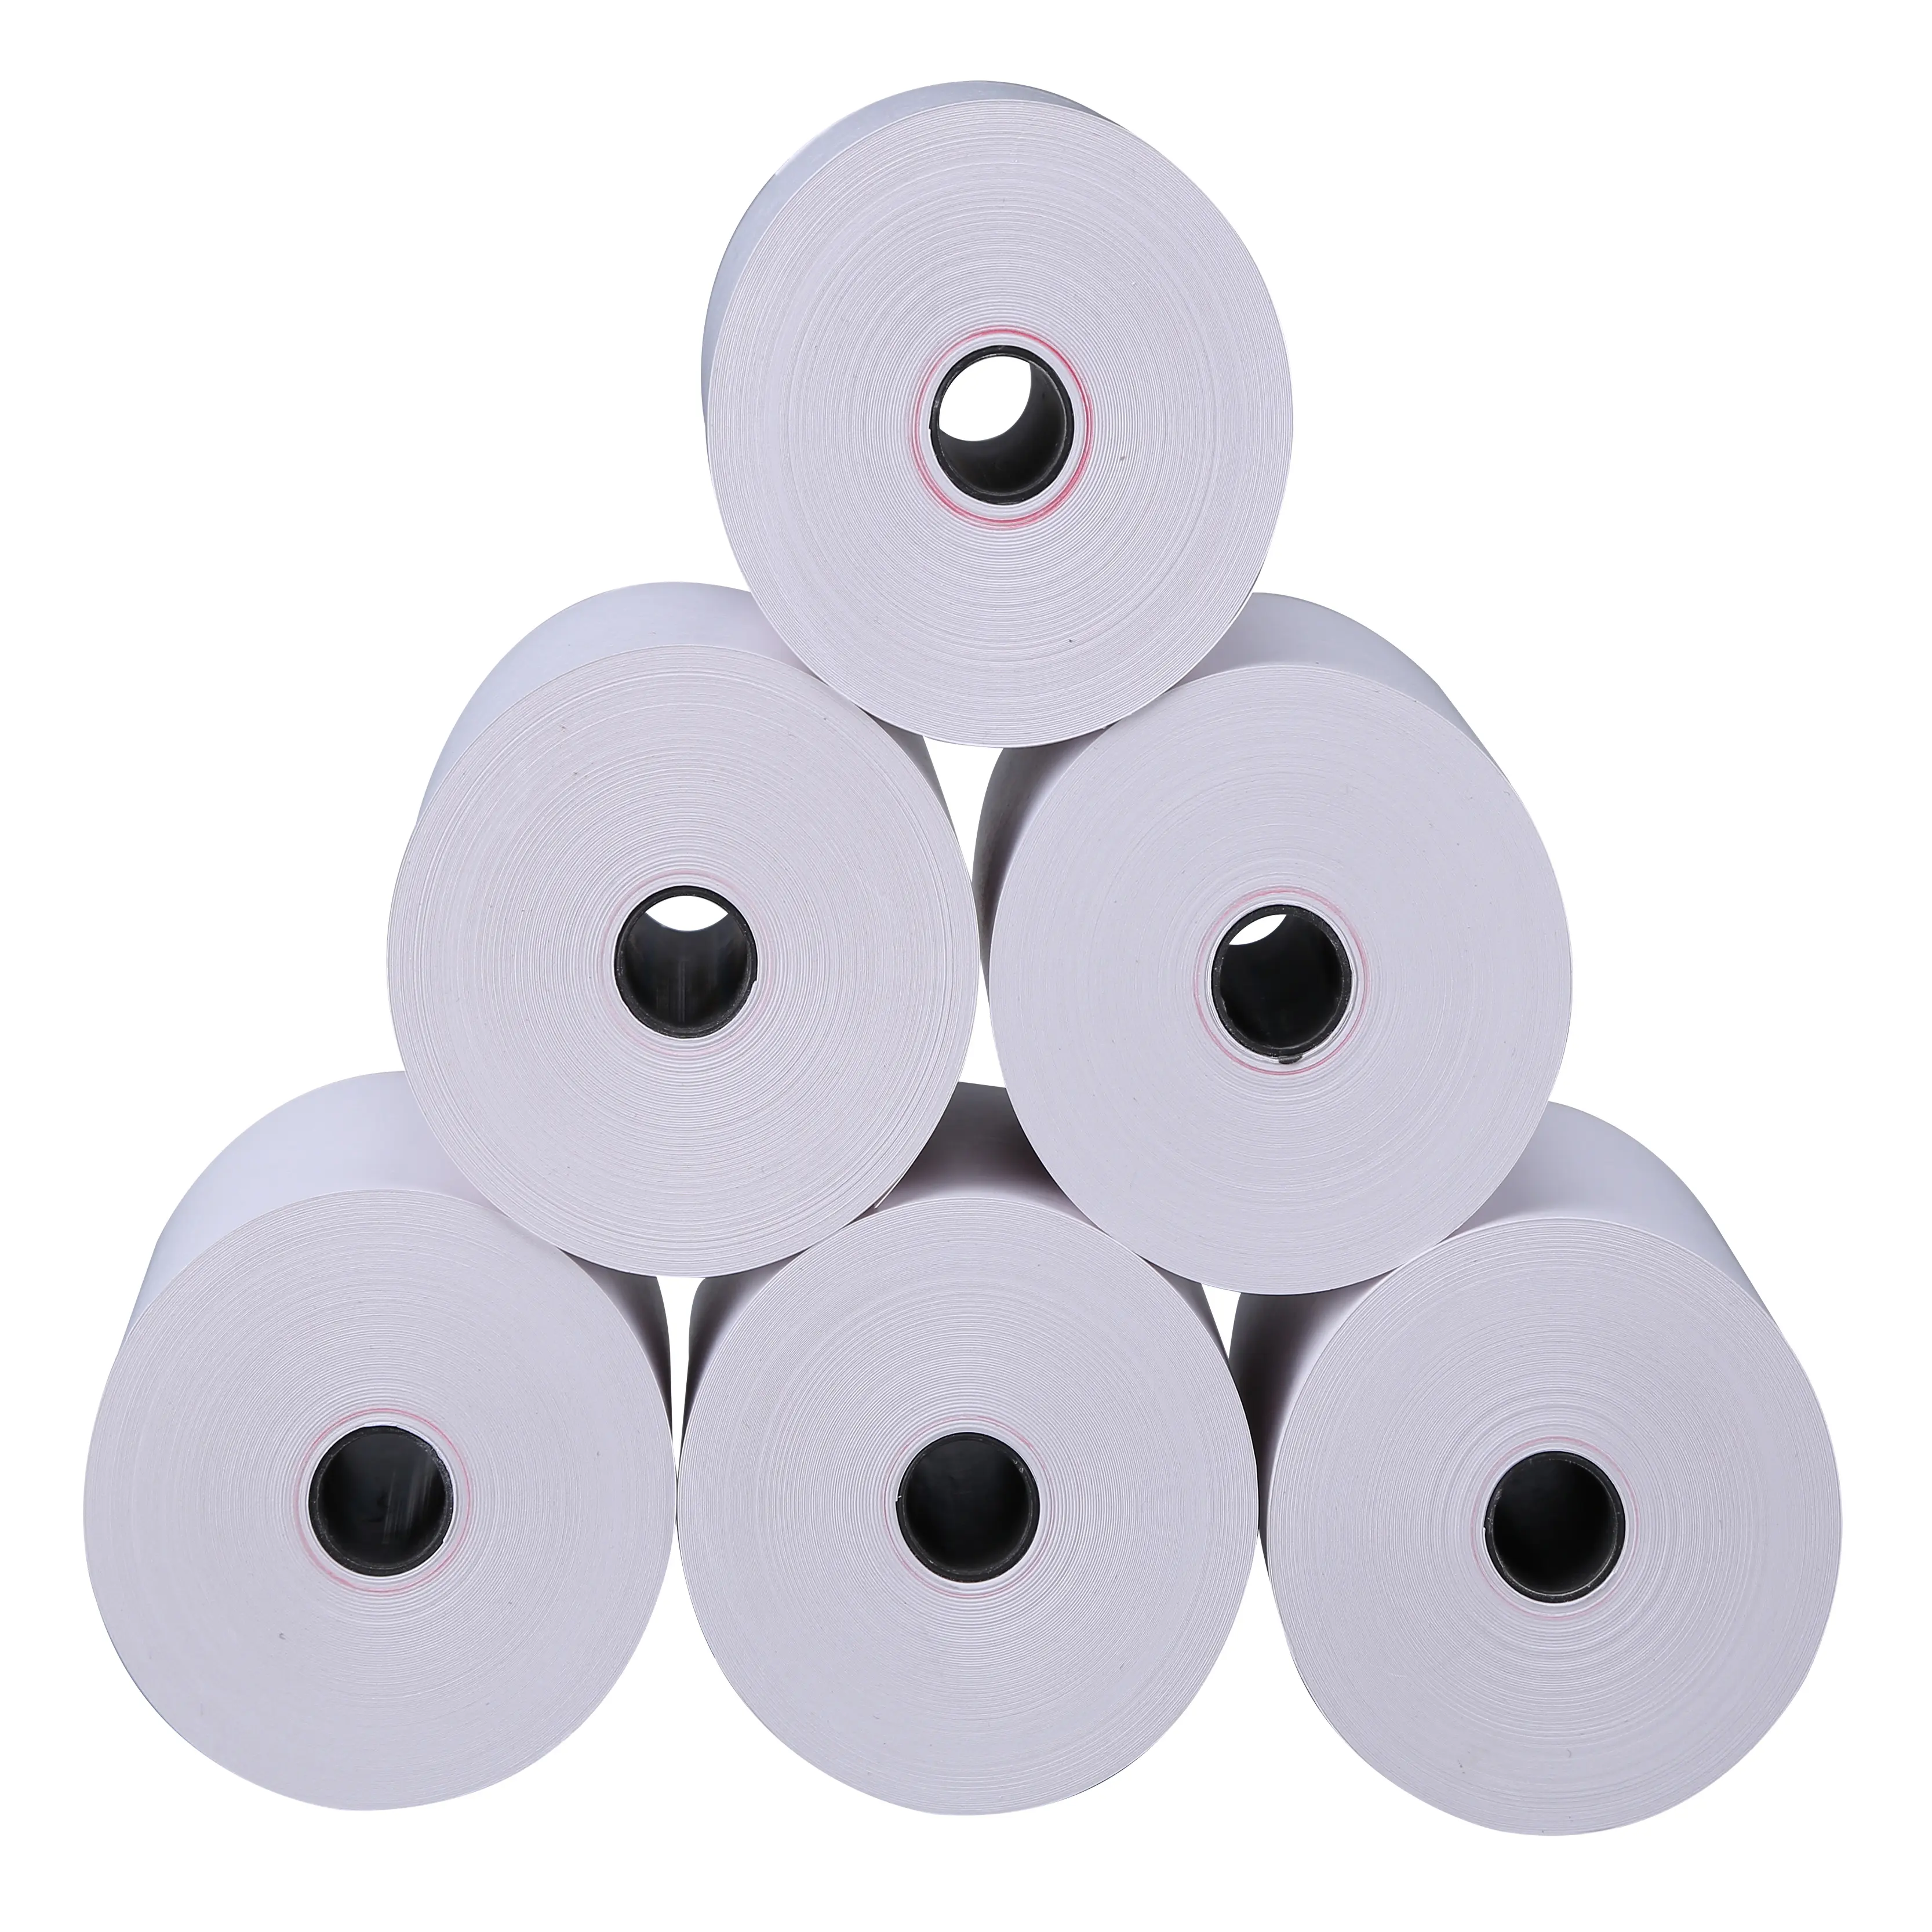 High Coating Technology 80X83 Jumbo Roll Cash Register Receipt Thermal Paper For POS ATM Machine